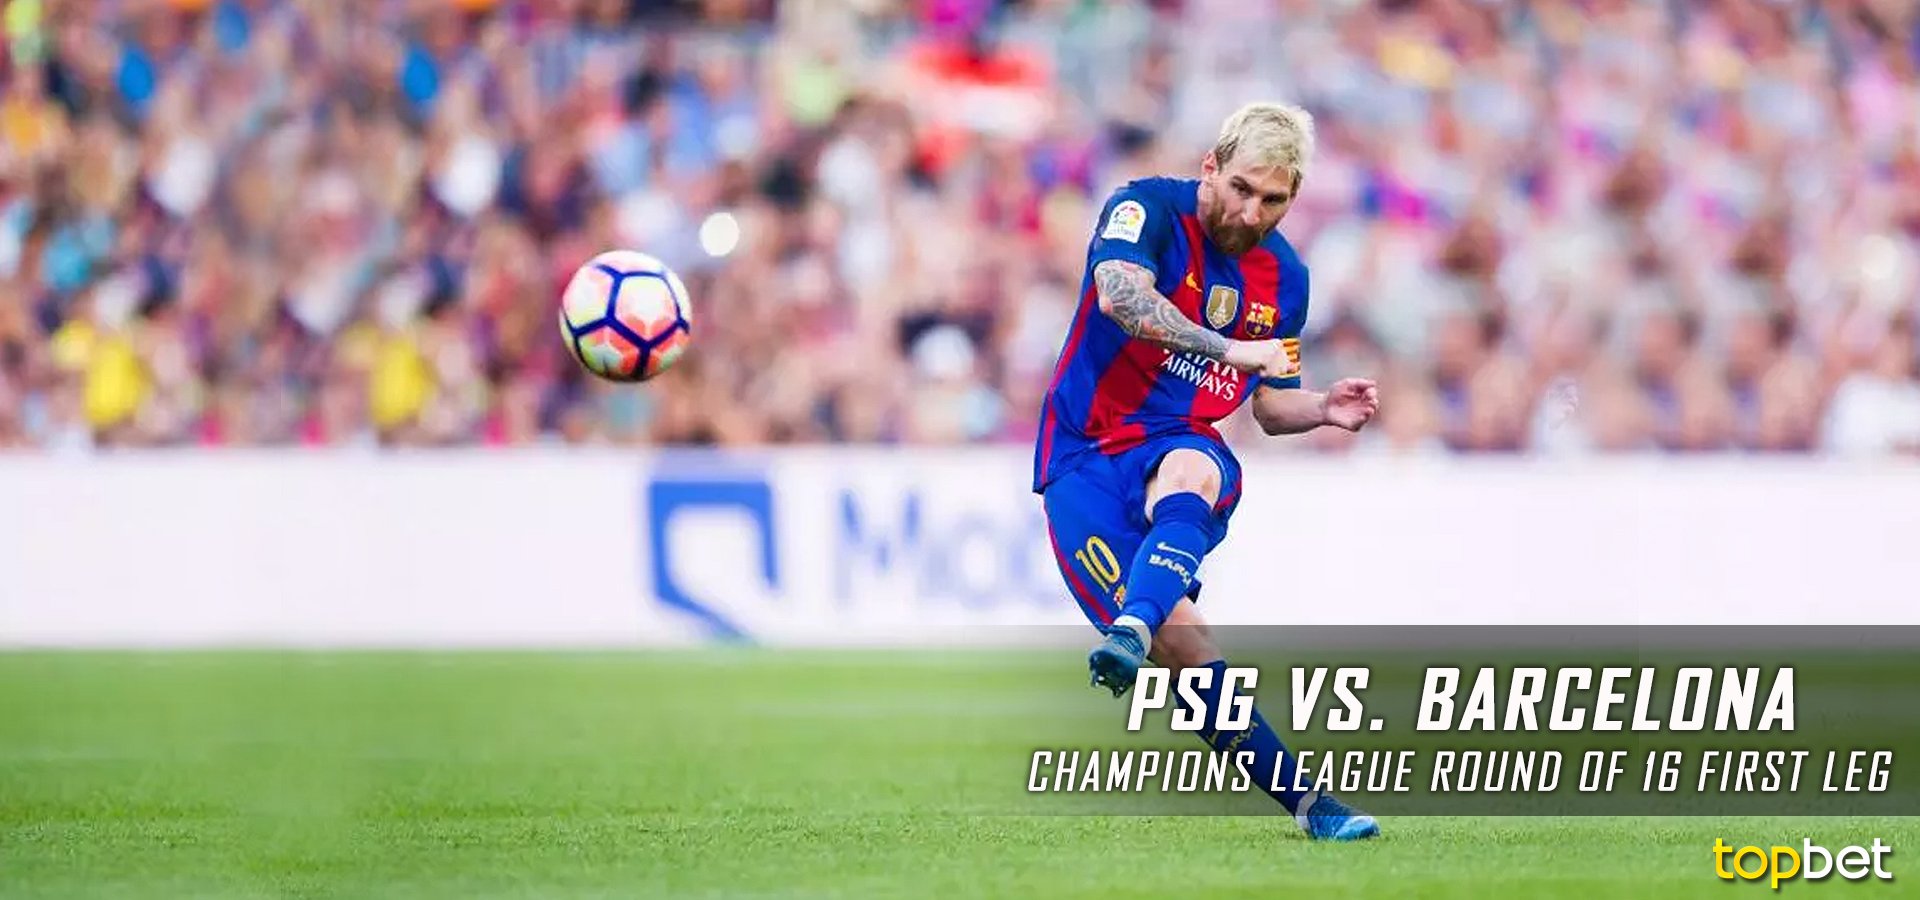 PSG vs Barcelona Champions League Predictions and Preview